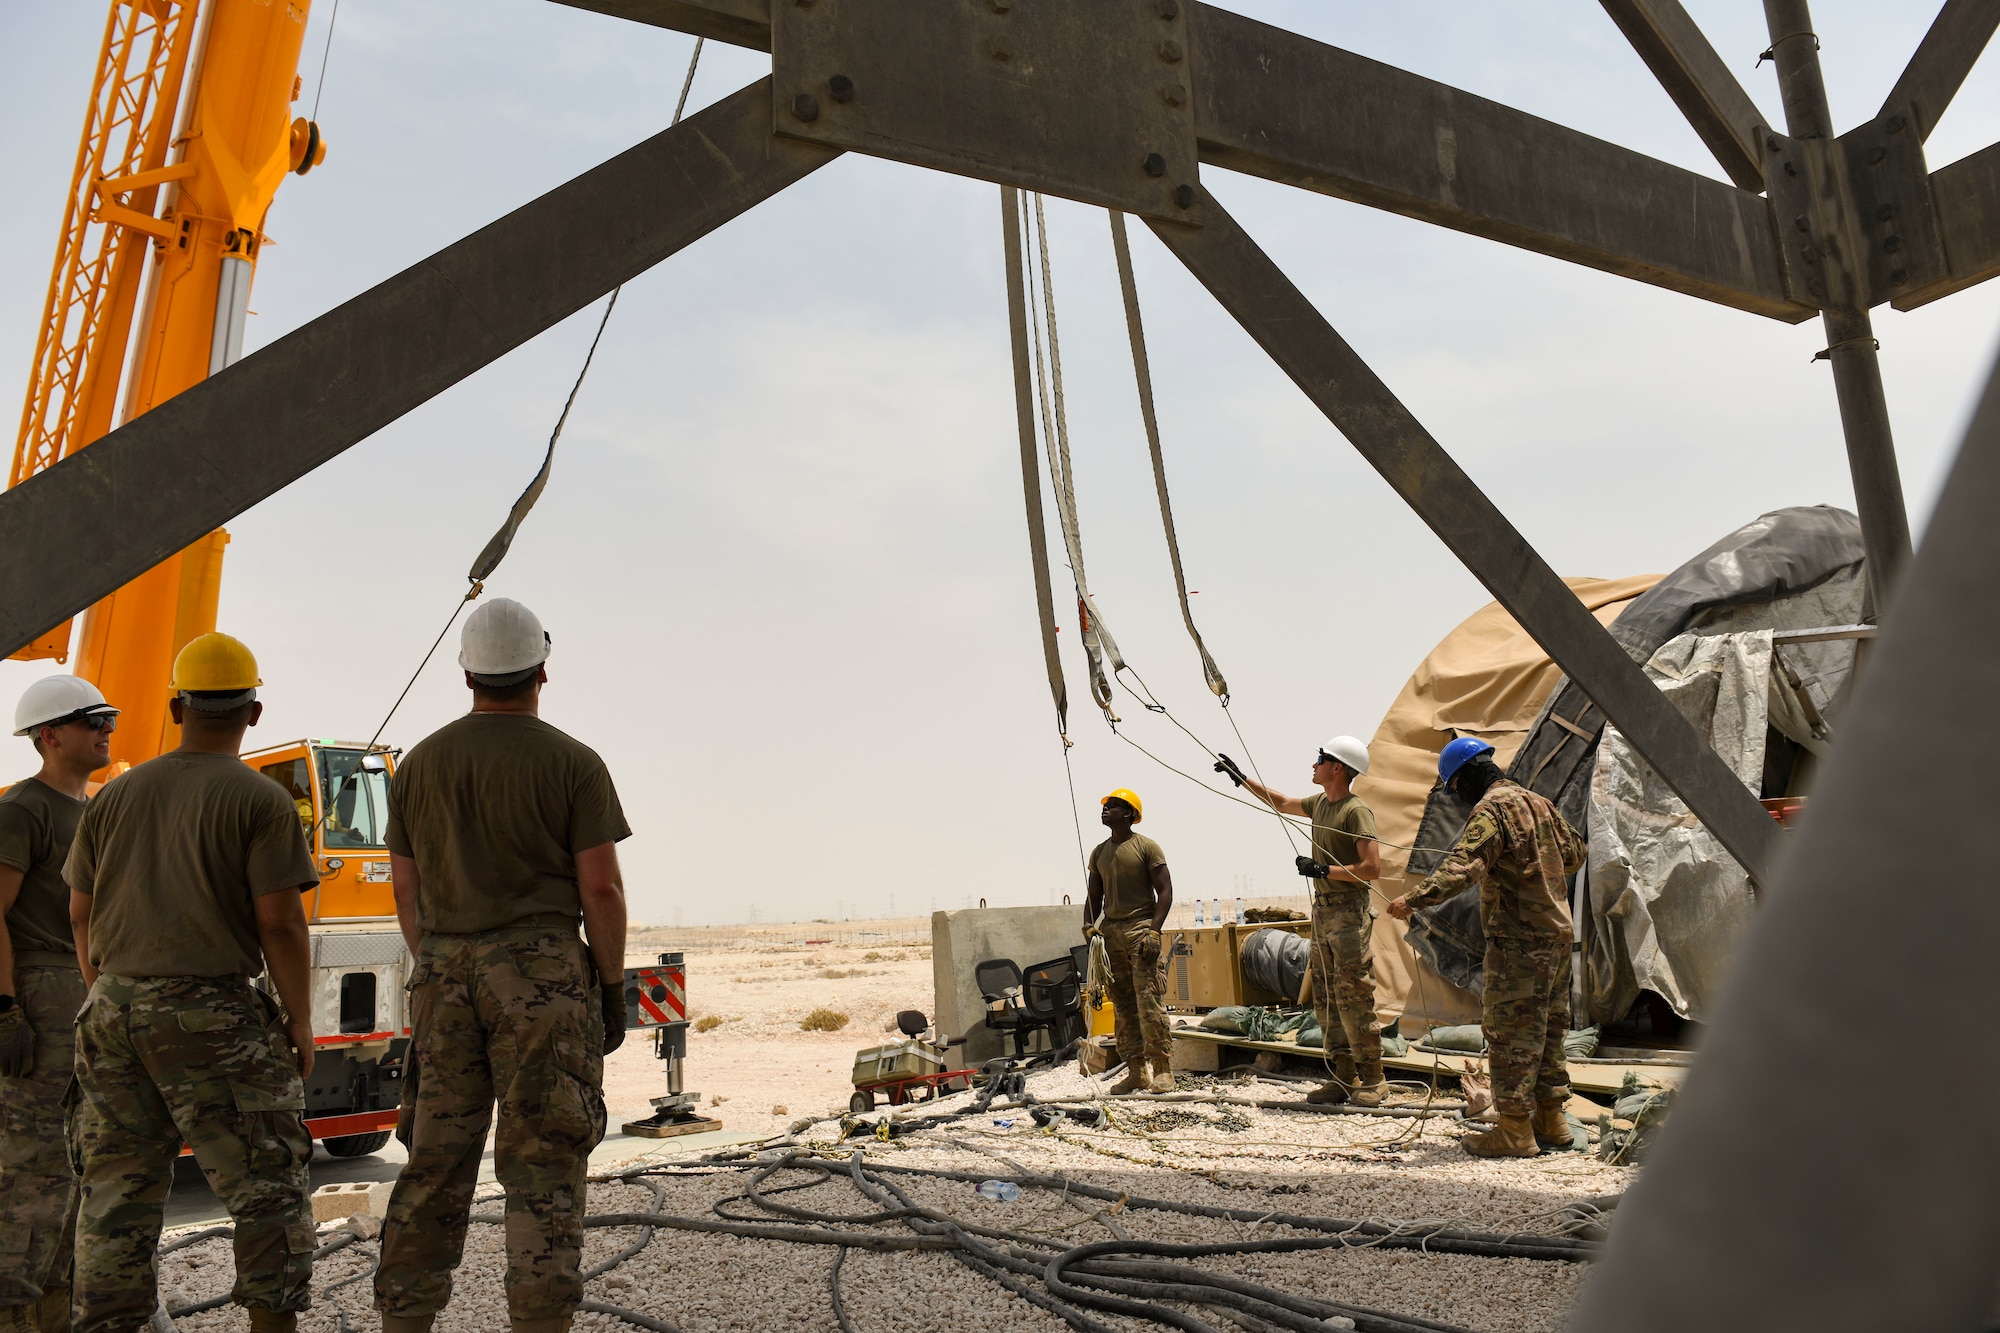 U.S. Air Force Airmen from the 727th Expeditionary Air Control Squadron, Detachment 3, prepare to remove the protective radome covering for an AN/TPS-75 tactical long-range radar system before performing scheduled maintenance July 27, 2021, at Al Udeid Air Base, Qatar. The radar provides a common surveillance and combat identification picture to support battle management command and control for the combined defense of the Arabian Peninsula. (U.S. Air Force by Staff Sgt. Alexandria Lee)